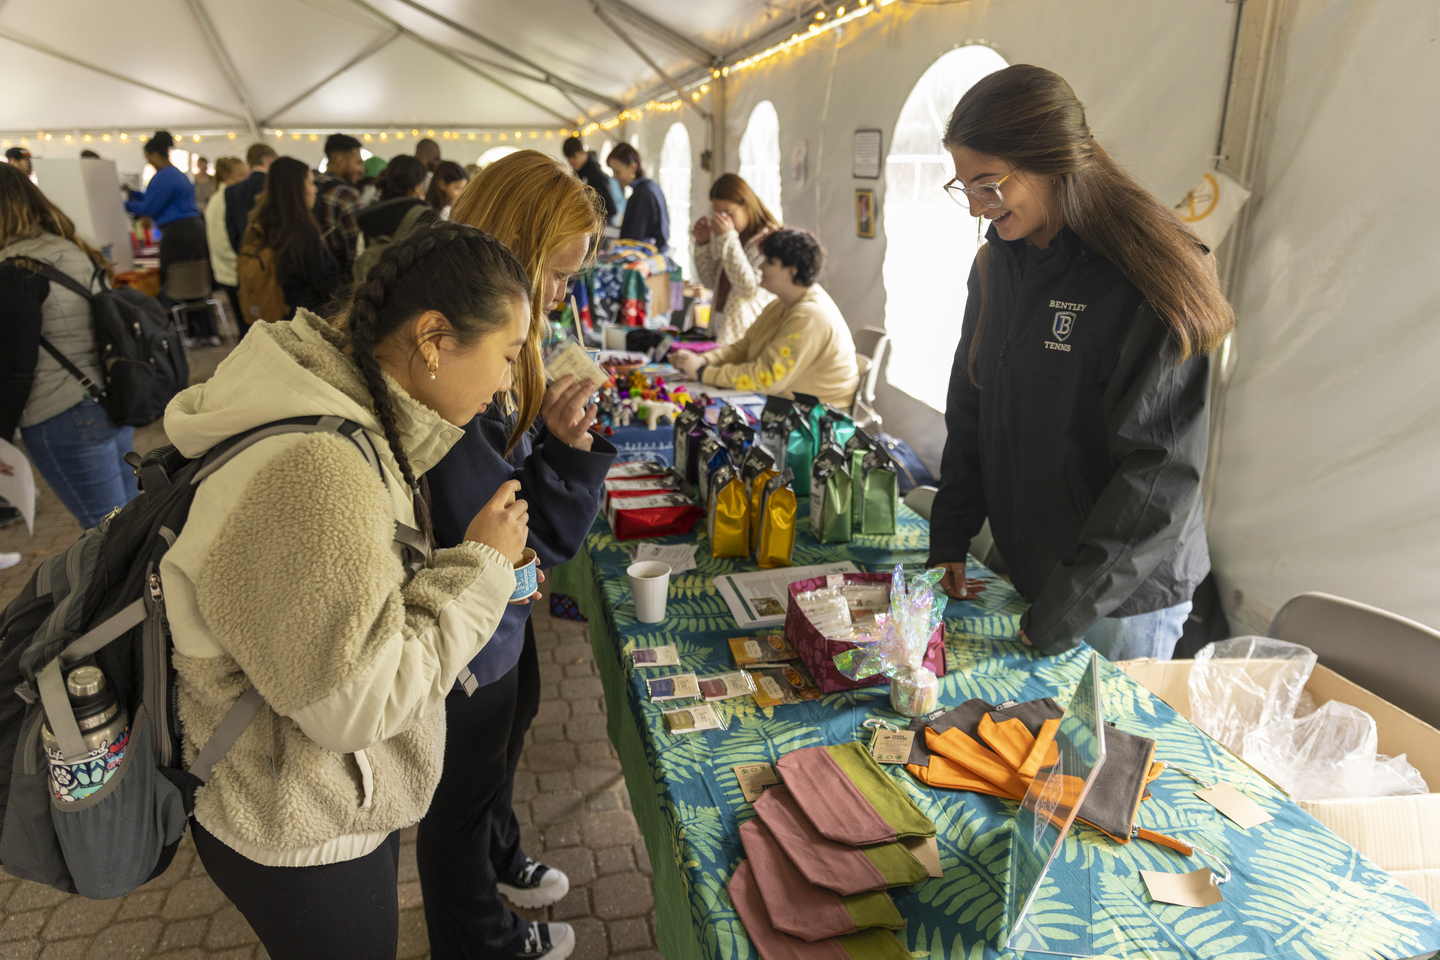 Bentley students browse colorful fabric products on a table at the fair trade fair